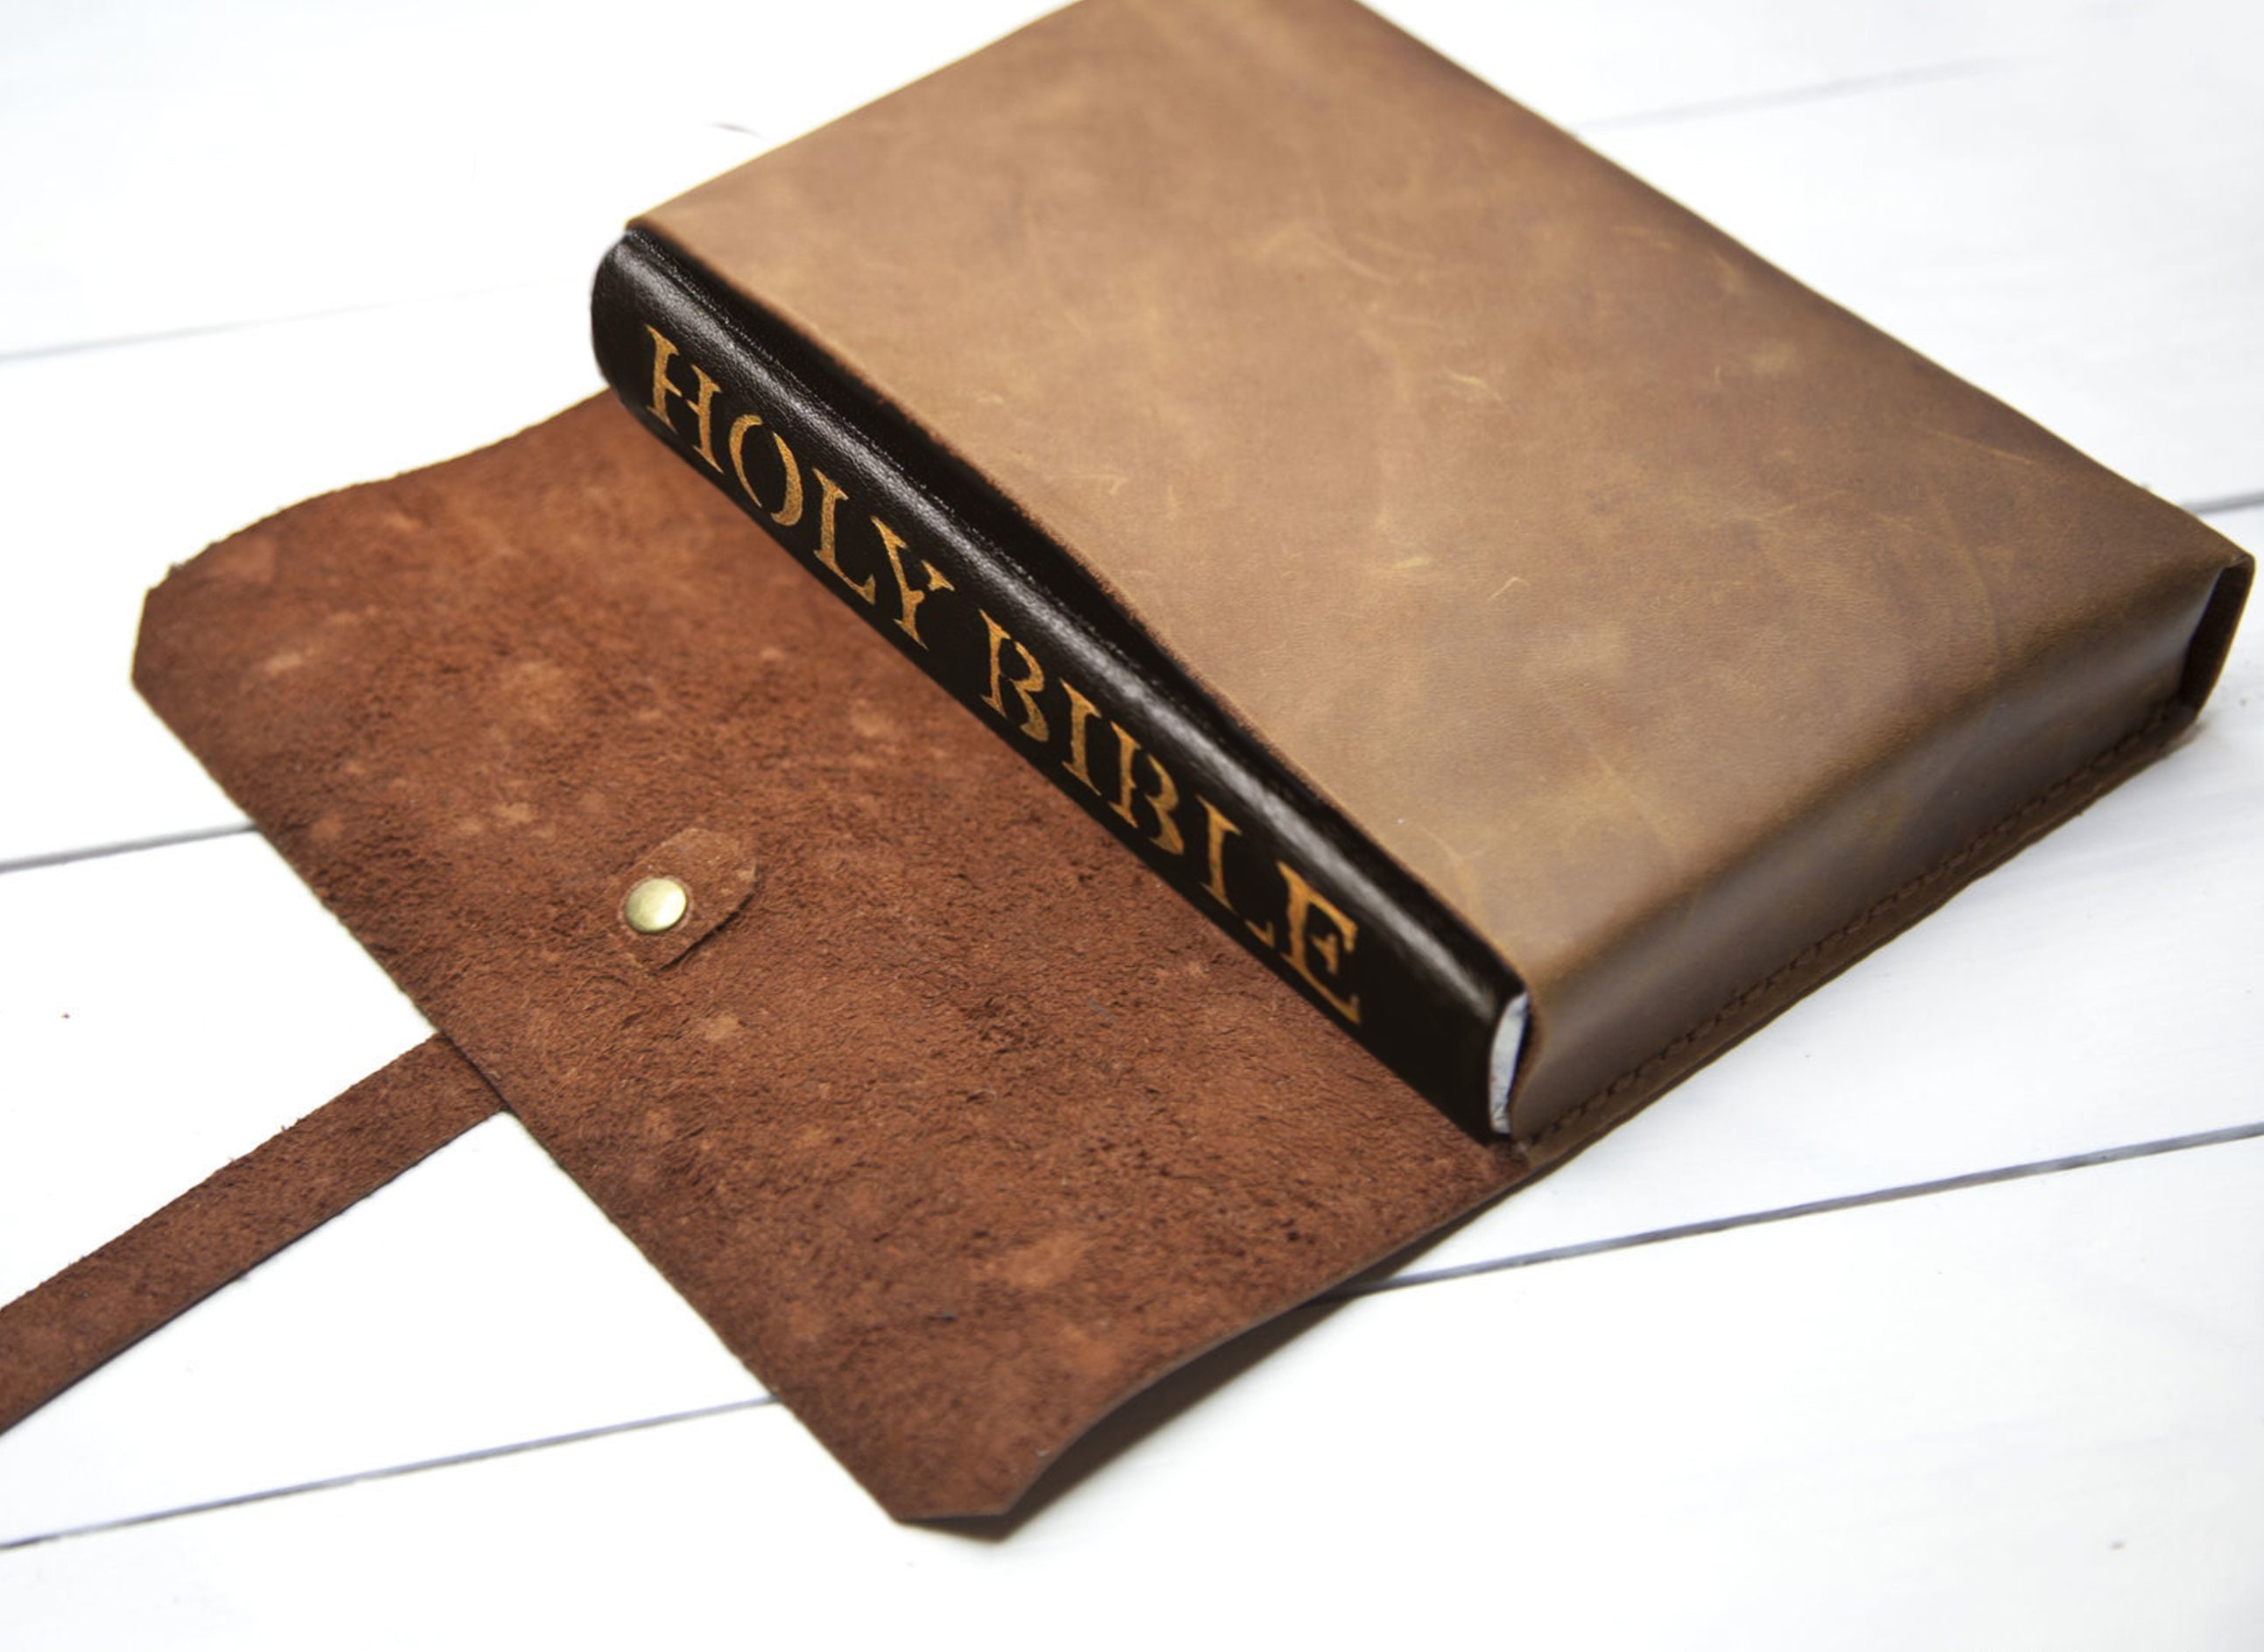 Book Cover,bible Cover,bibel Register, Leather Bible Cover,book  Covers,bible Case,leather Book Cover, Leather Accessories,custom Book Cover  